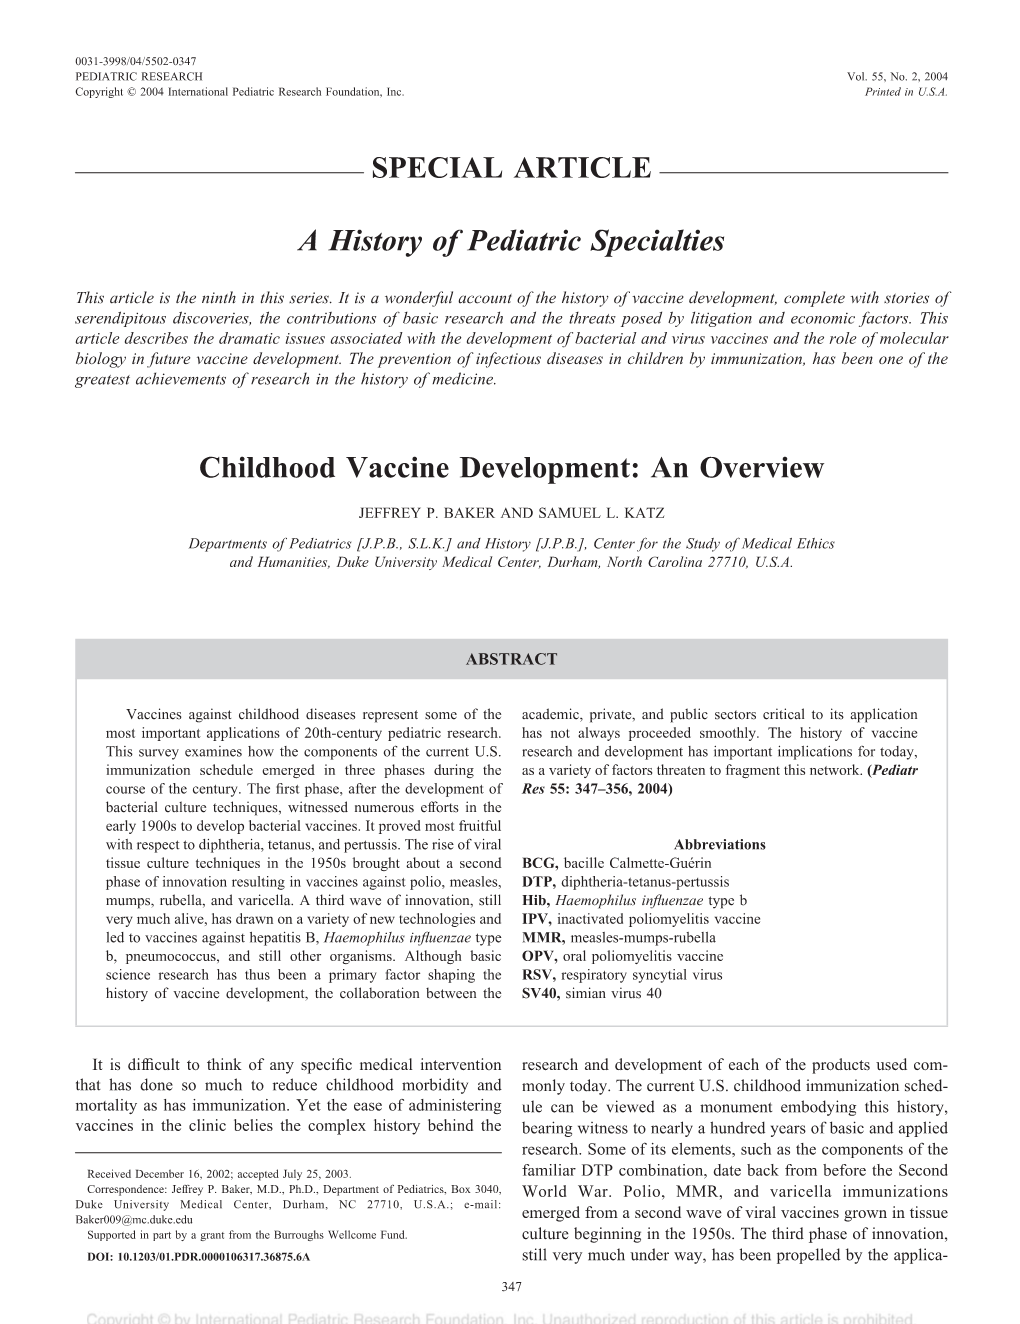 SPECIAL ARTICLE a History of Pediatric Specialties